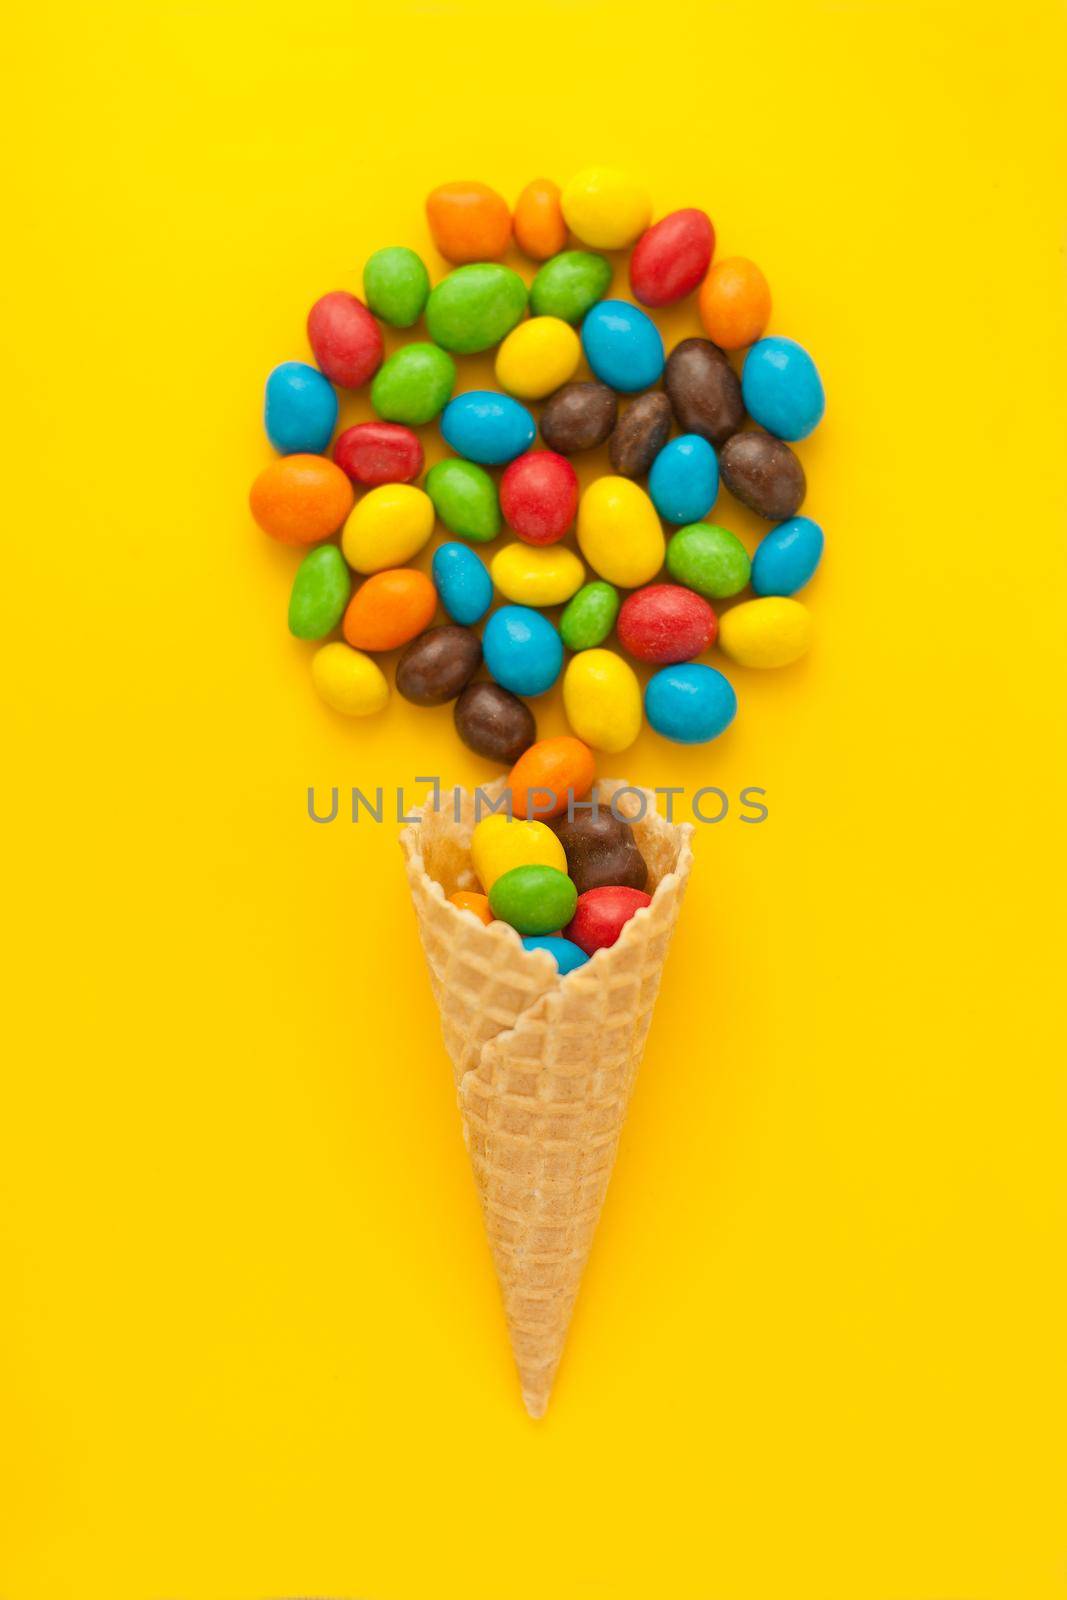 splash of colorful nuts or candies from ice cone. Explosion of dates close up on yellow background. Creative concept of proper snacks